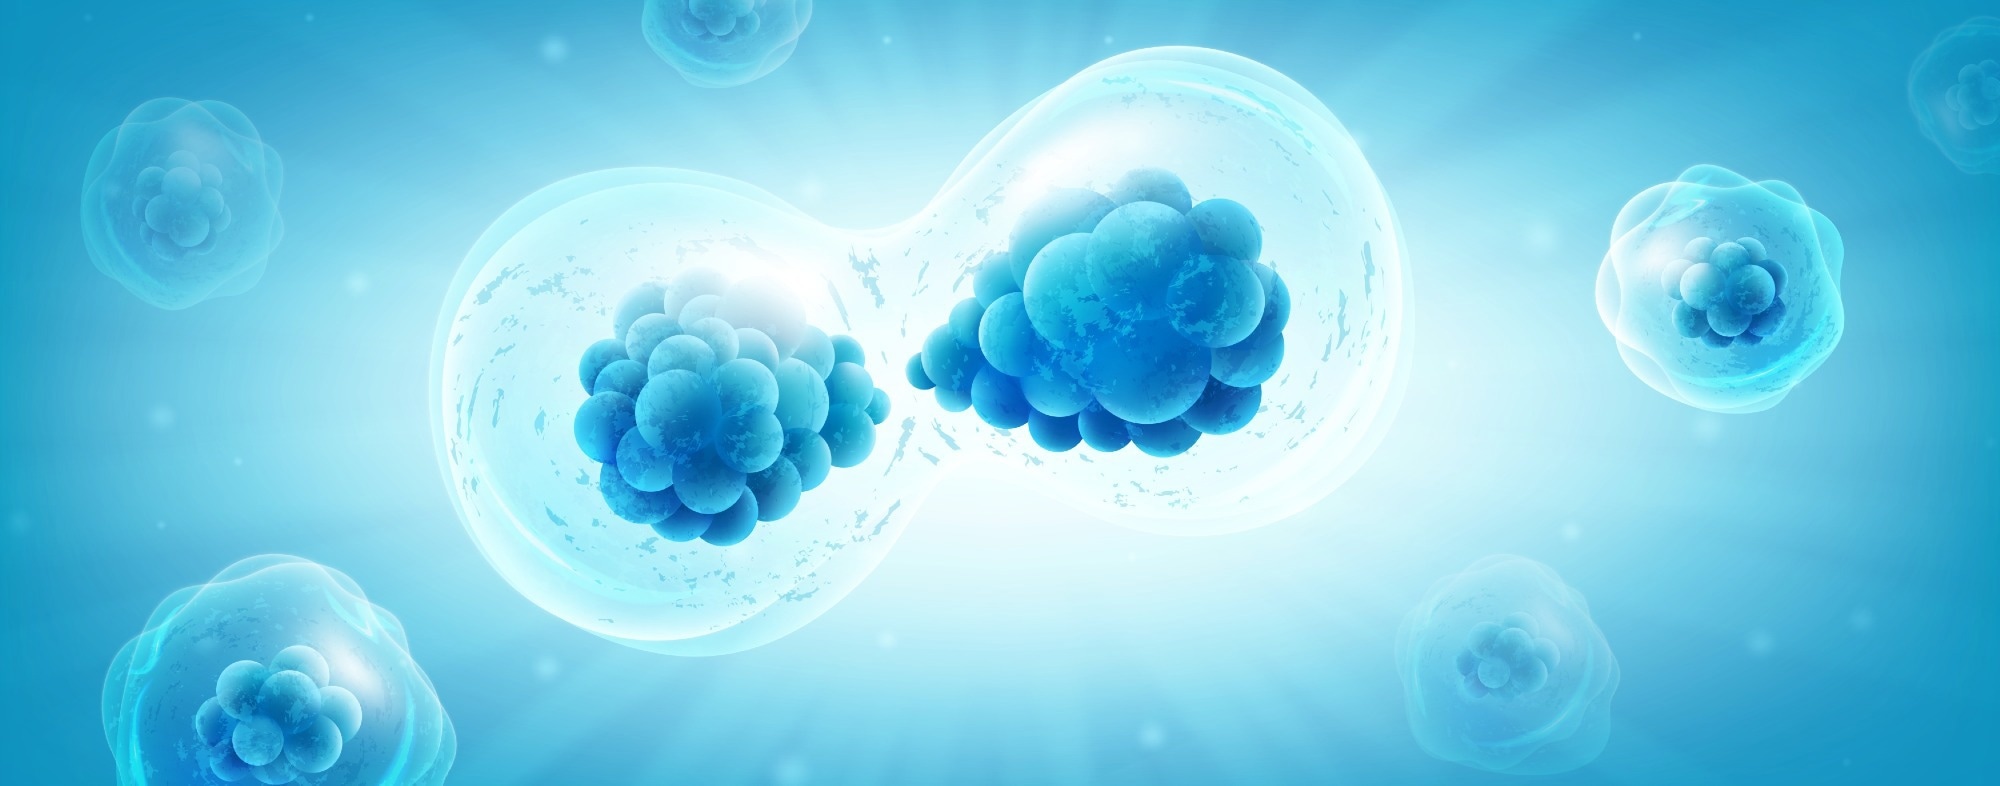 Study: De novo birth of functional microproteins in the human lineage. Image Credit: MarySan/Shutterstock